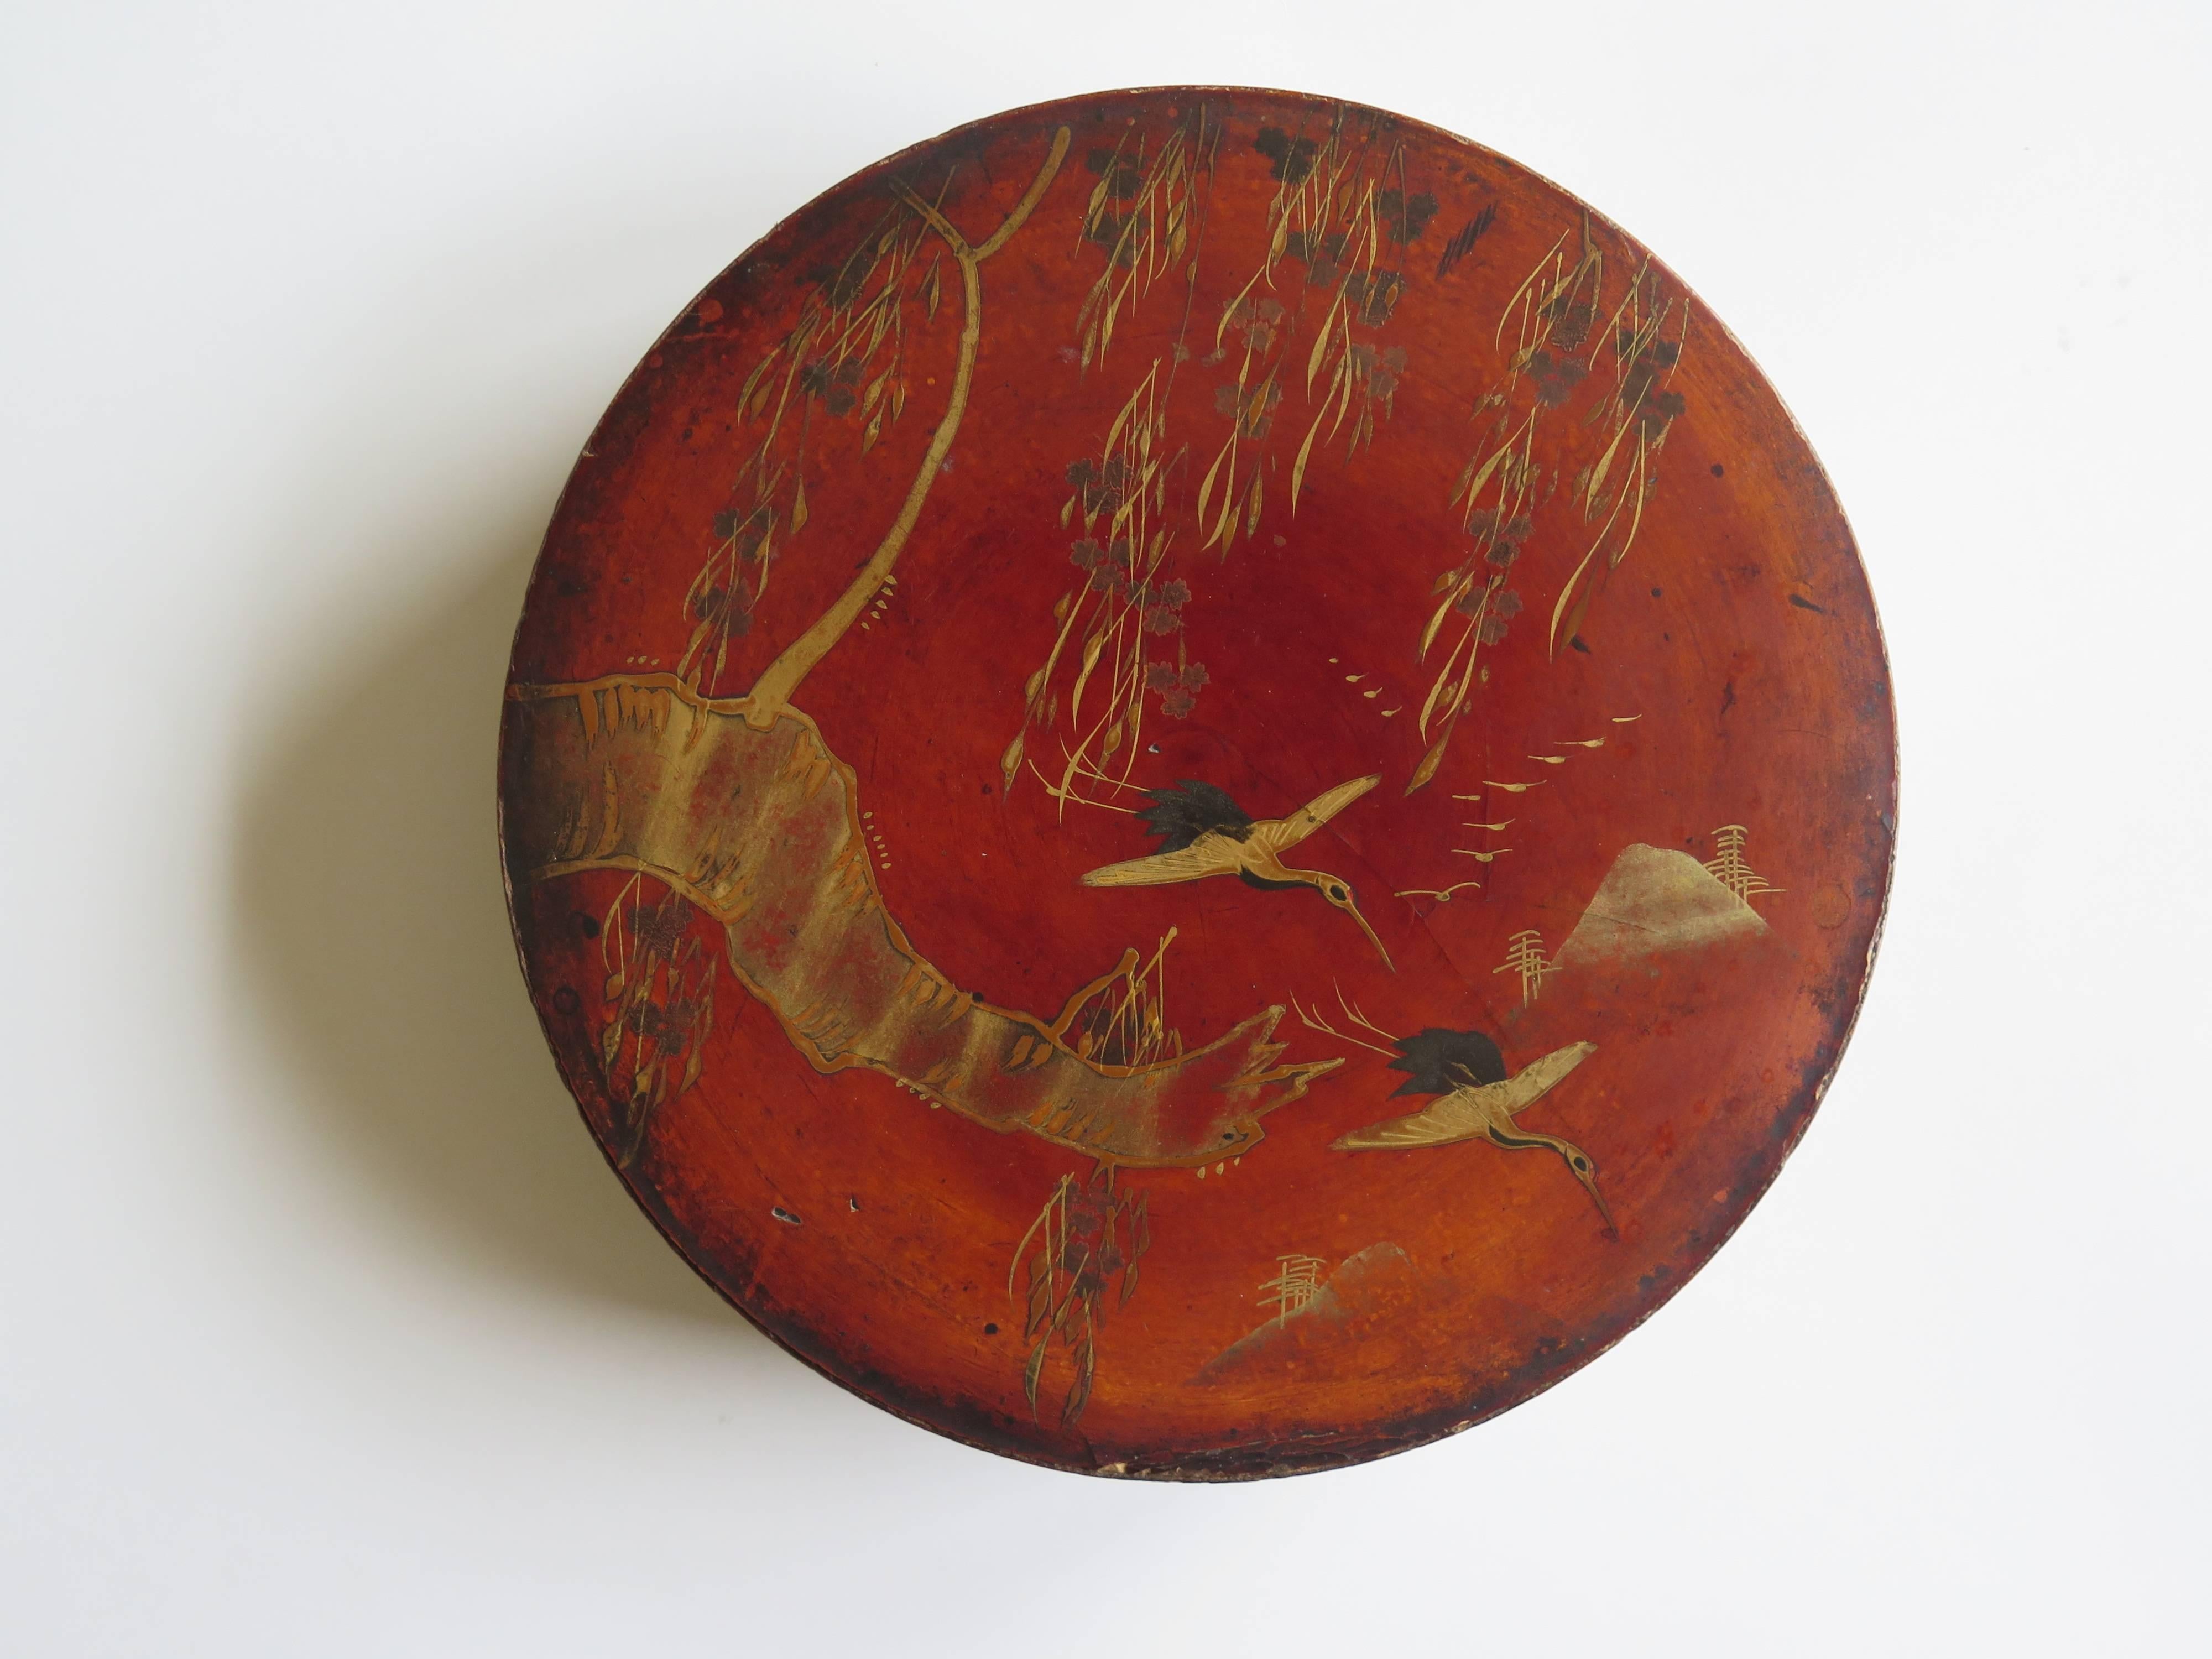 This is a beautiful papier mâché, large circular lacquered box, which we attribute to being made in Japan during the mid-19th century.

This is a large and very decorative box with a delicately hand painted scene of two cranes in flight underneath